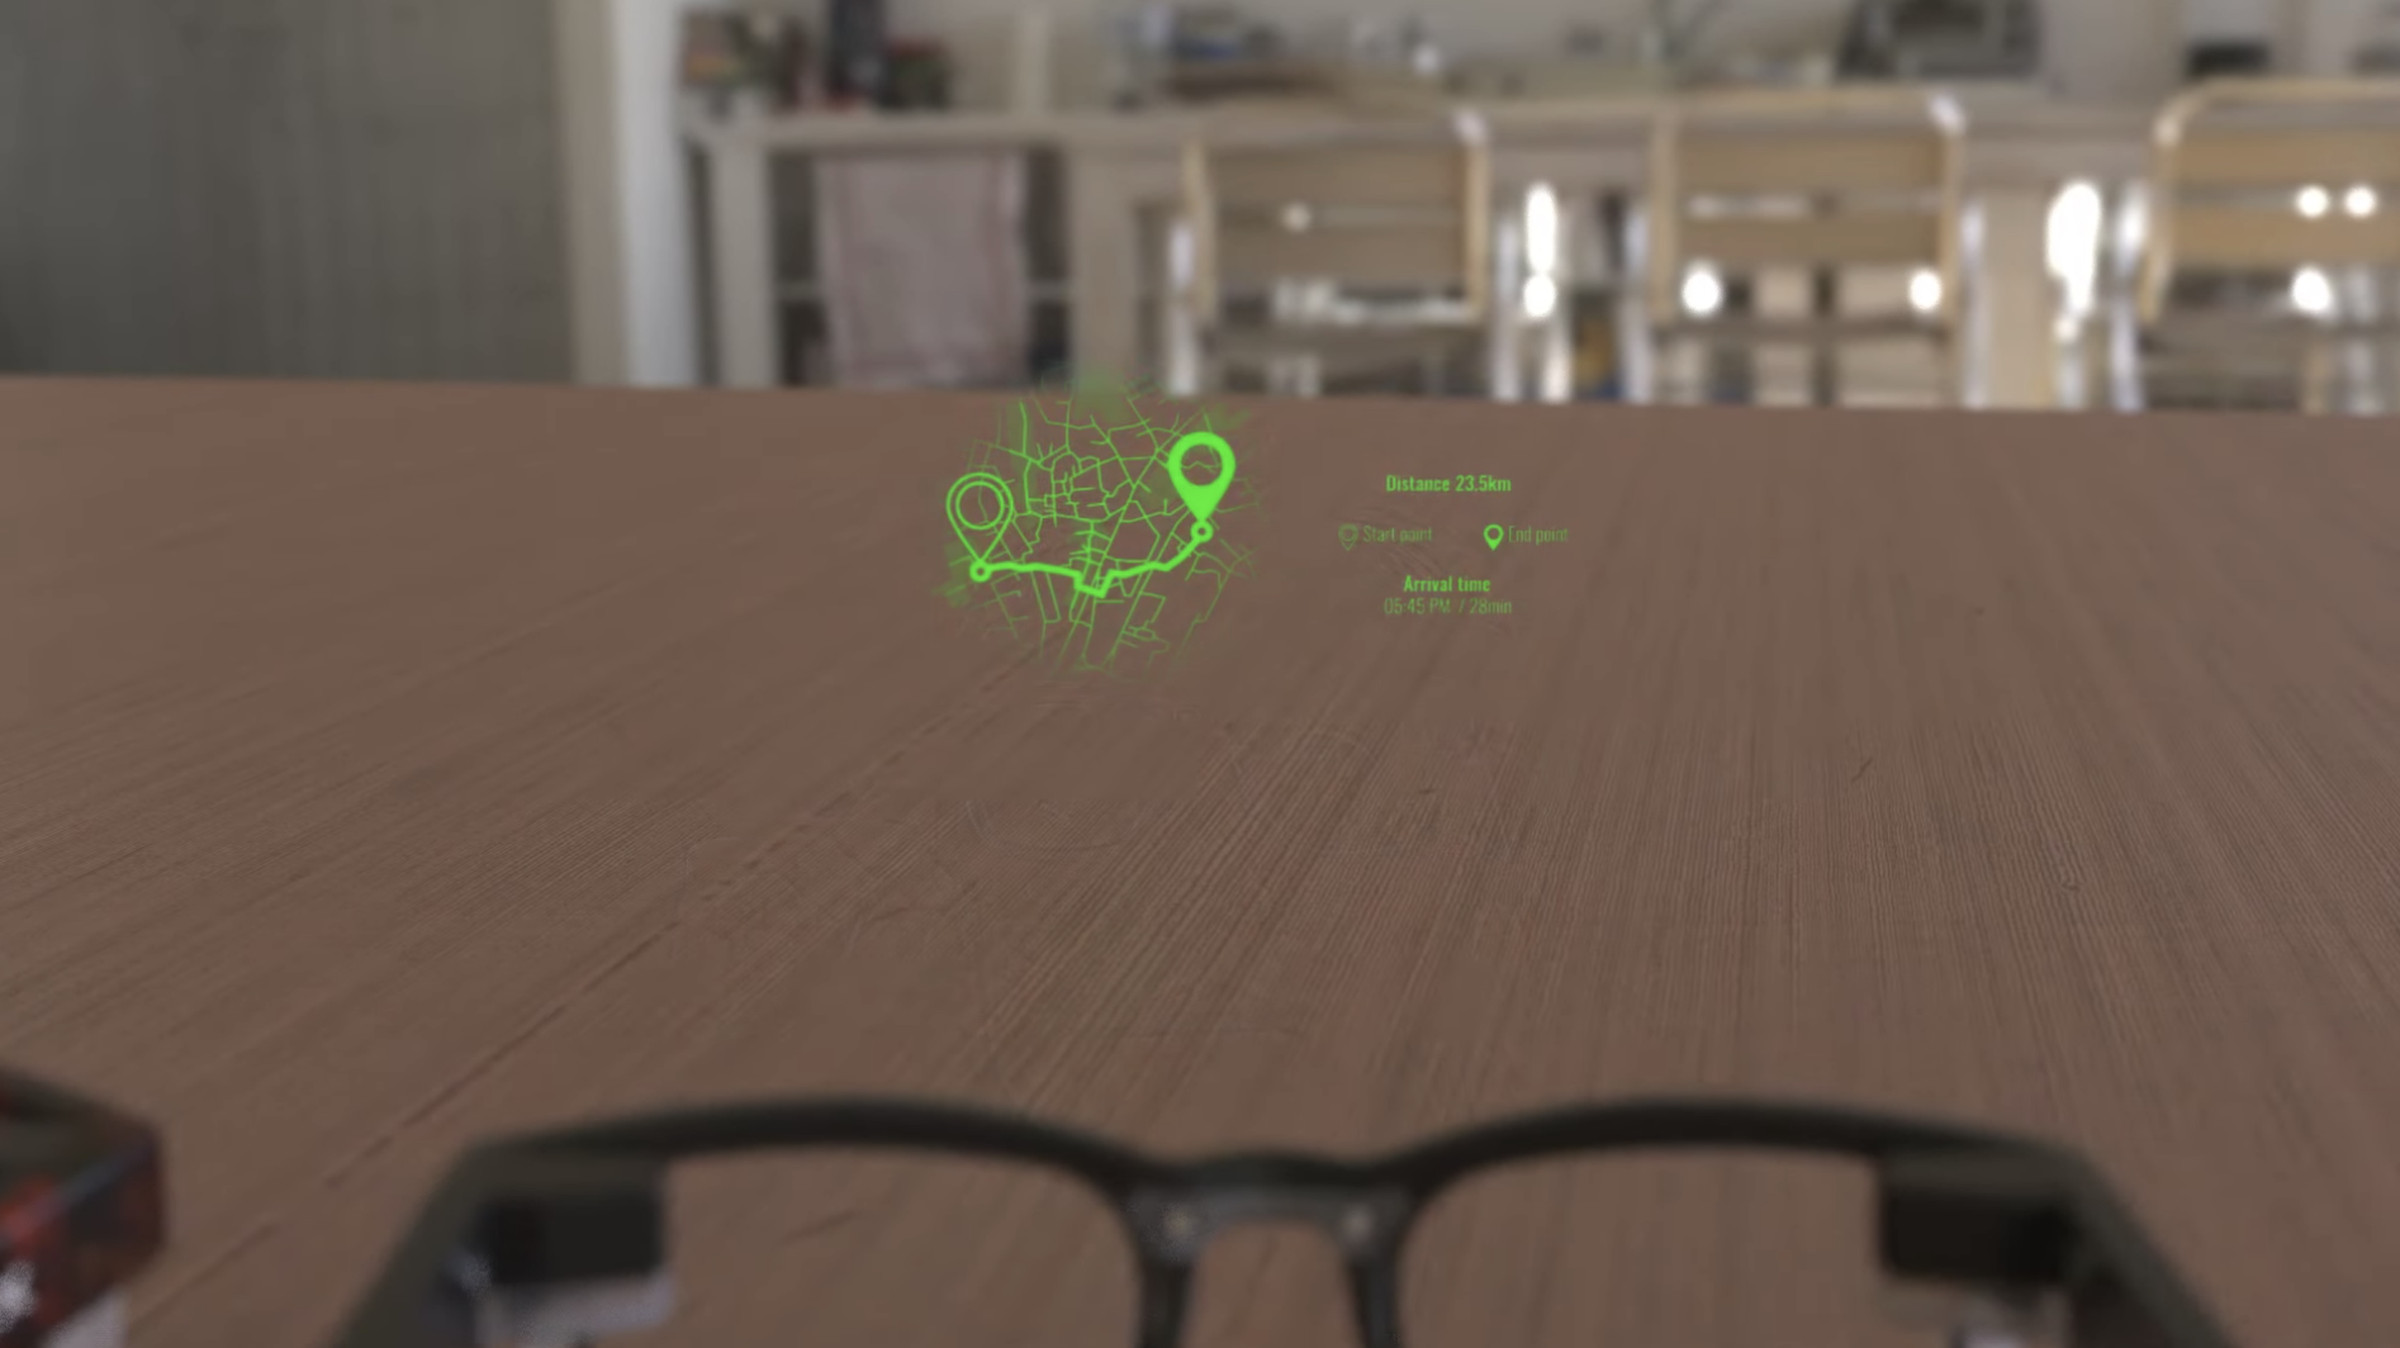 Similar to Google Glass, Vuzix’s smart glasses are more heads-up displays than true augmented reality devices and are designed to mirror information from a paired smartphone. 